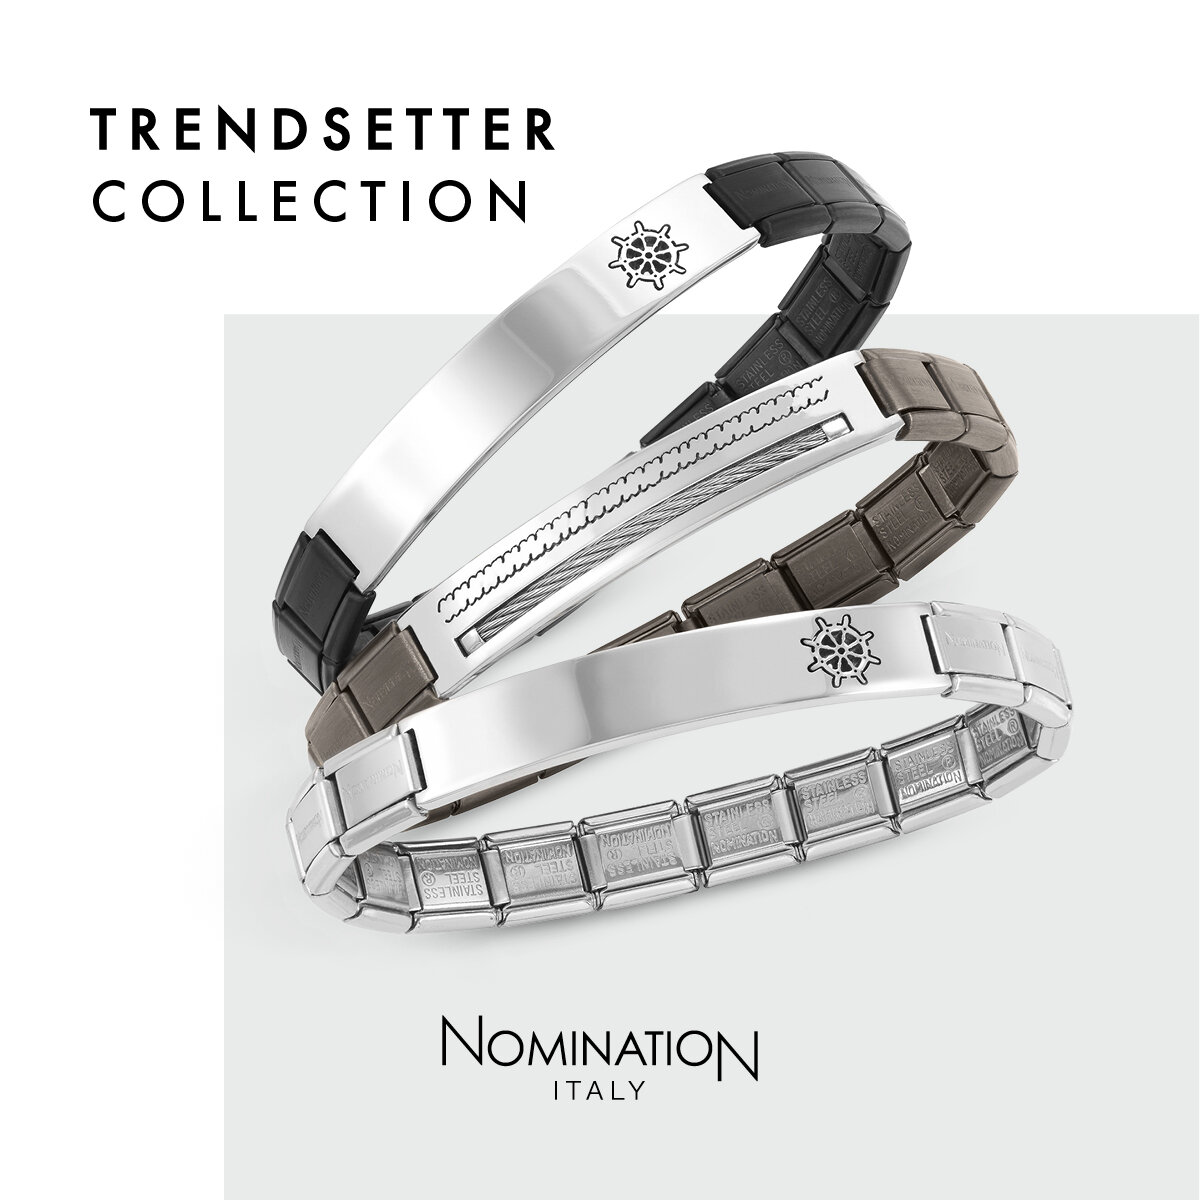 05_feb_FB_Trendsetter_Collection_For_Him_Nominationitaly.jpg